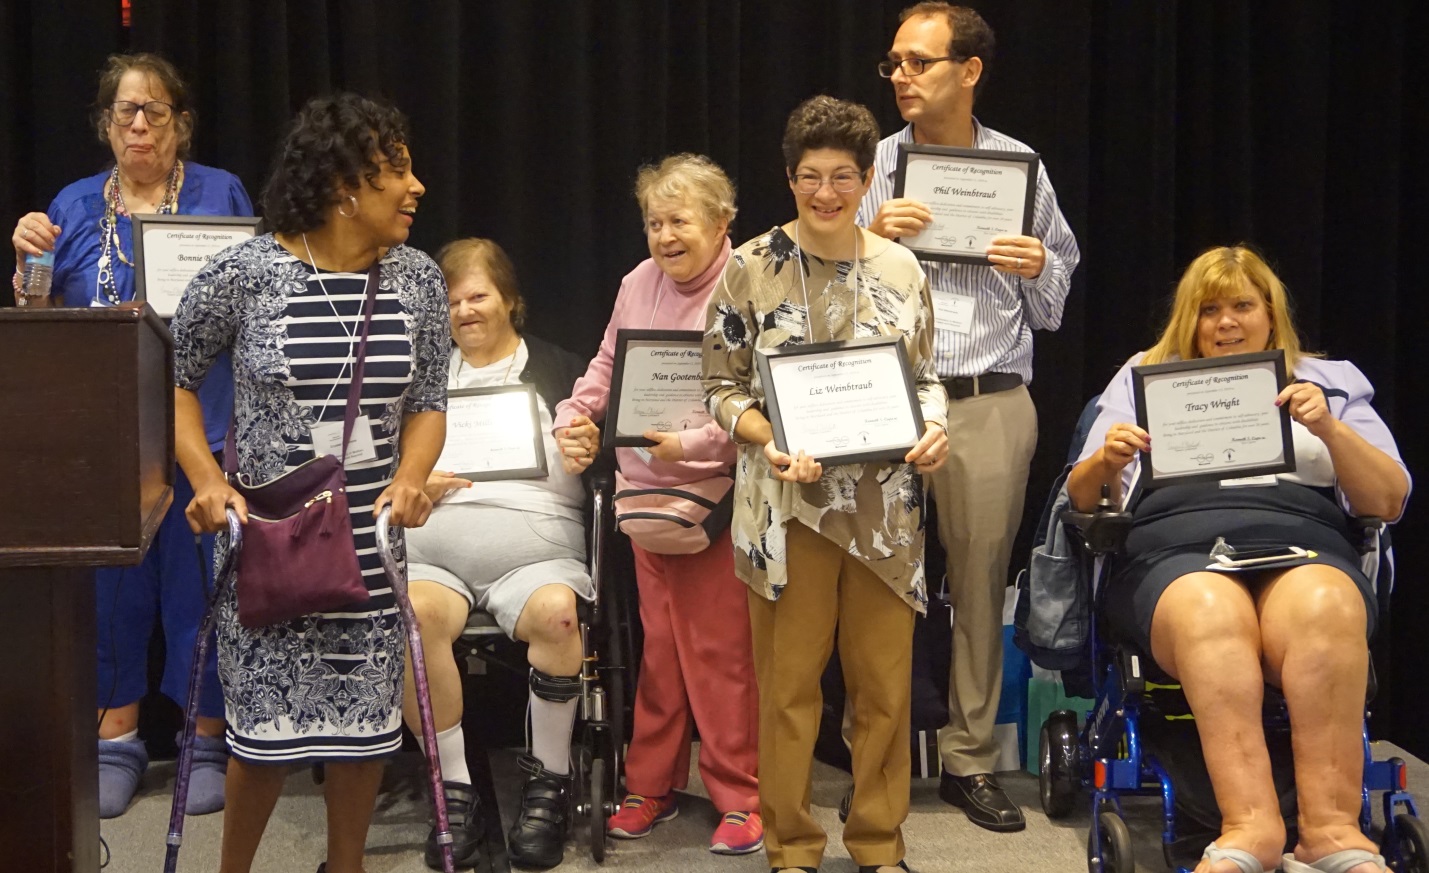 POG self-advocates receive awards at the conference.